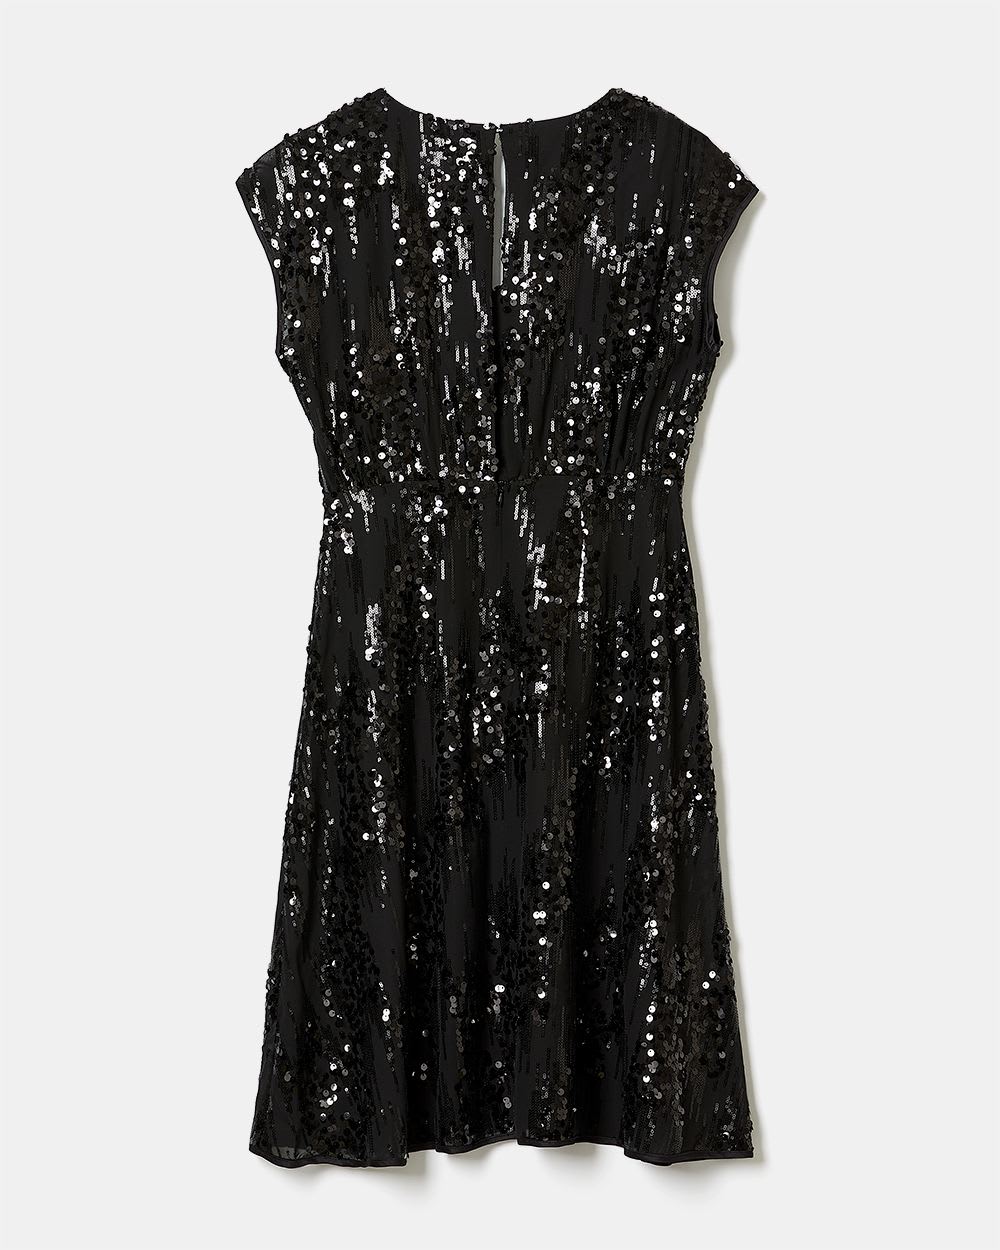 Distressed Sequin V-Neck Fit and Flare Cocktail Dress